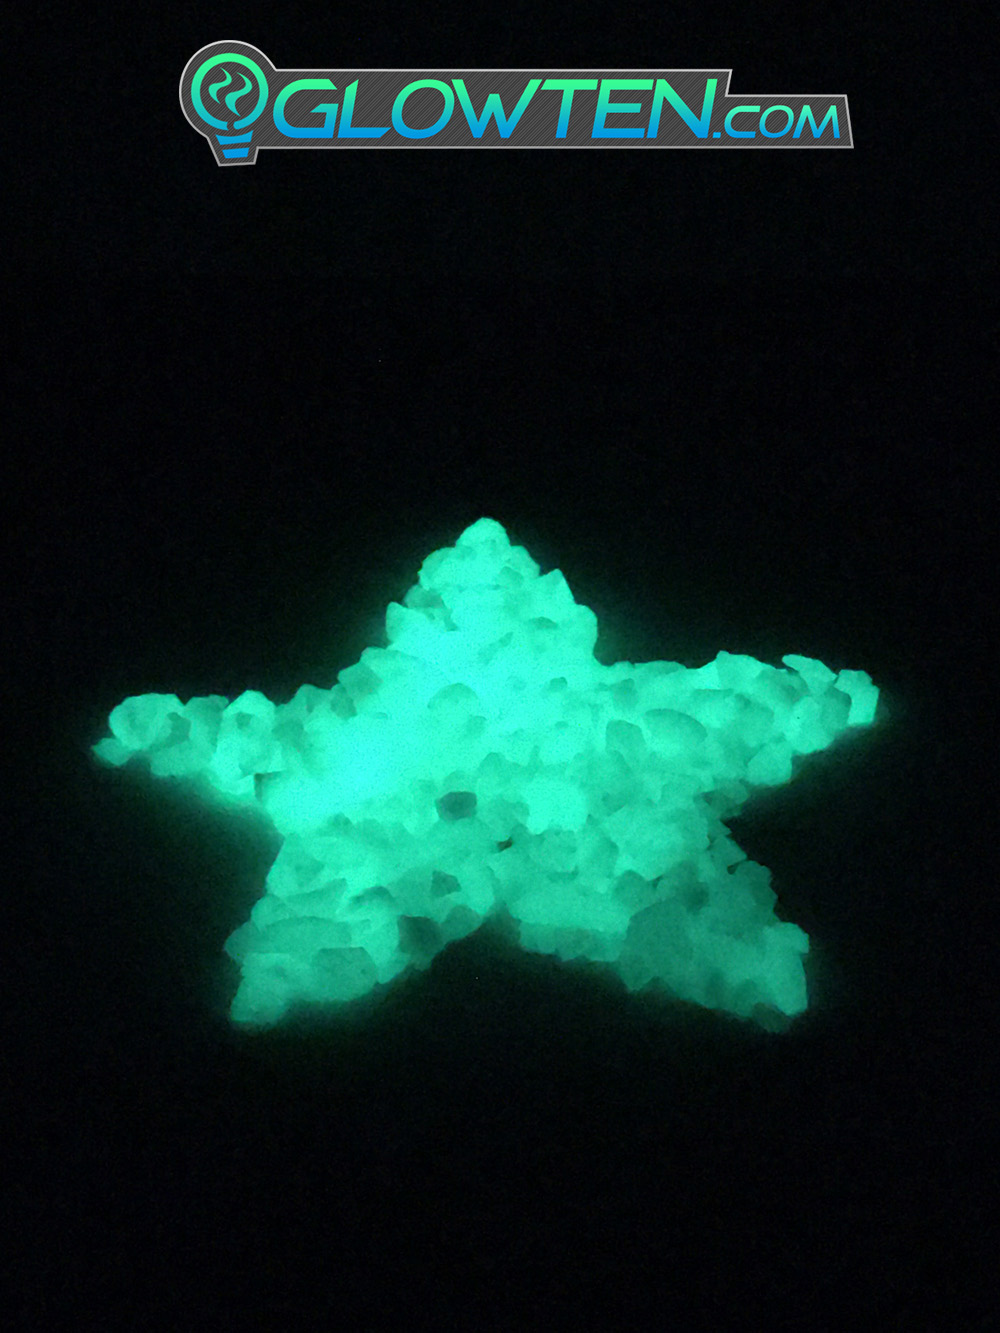 GLOWTEN.com - Environmental Friendly Green Aura Luminous Stones Pebbles Size Large Natural Glowing in the Dark Ground Glow Rocks Arts n Crafts Decoration Eco Friendly Material picture photo cap preview pic 9